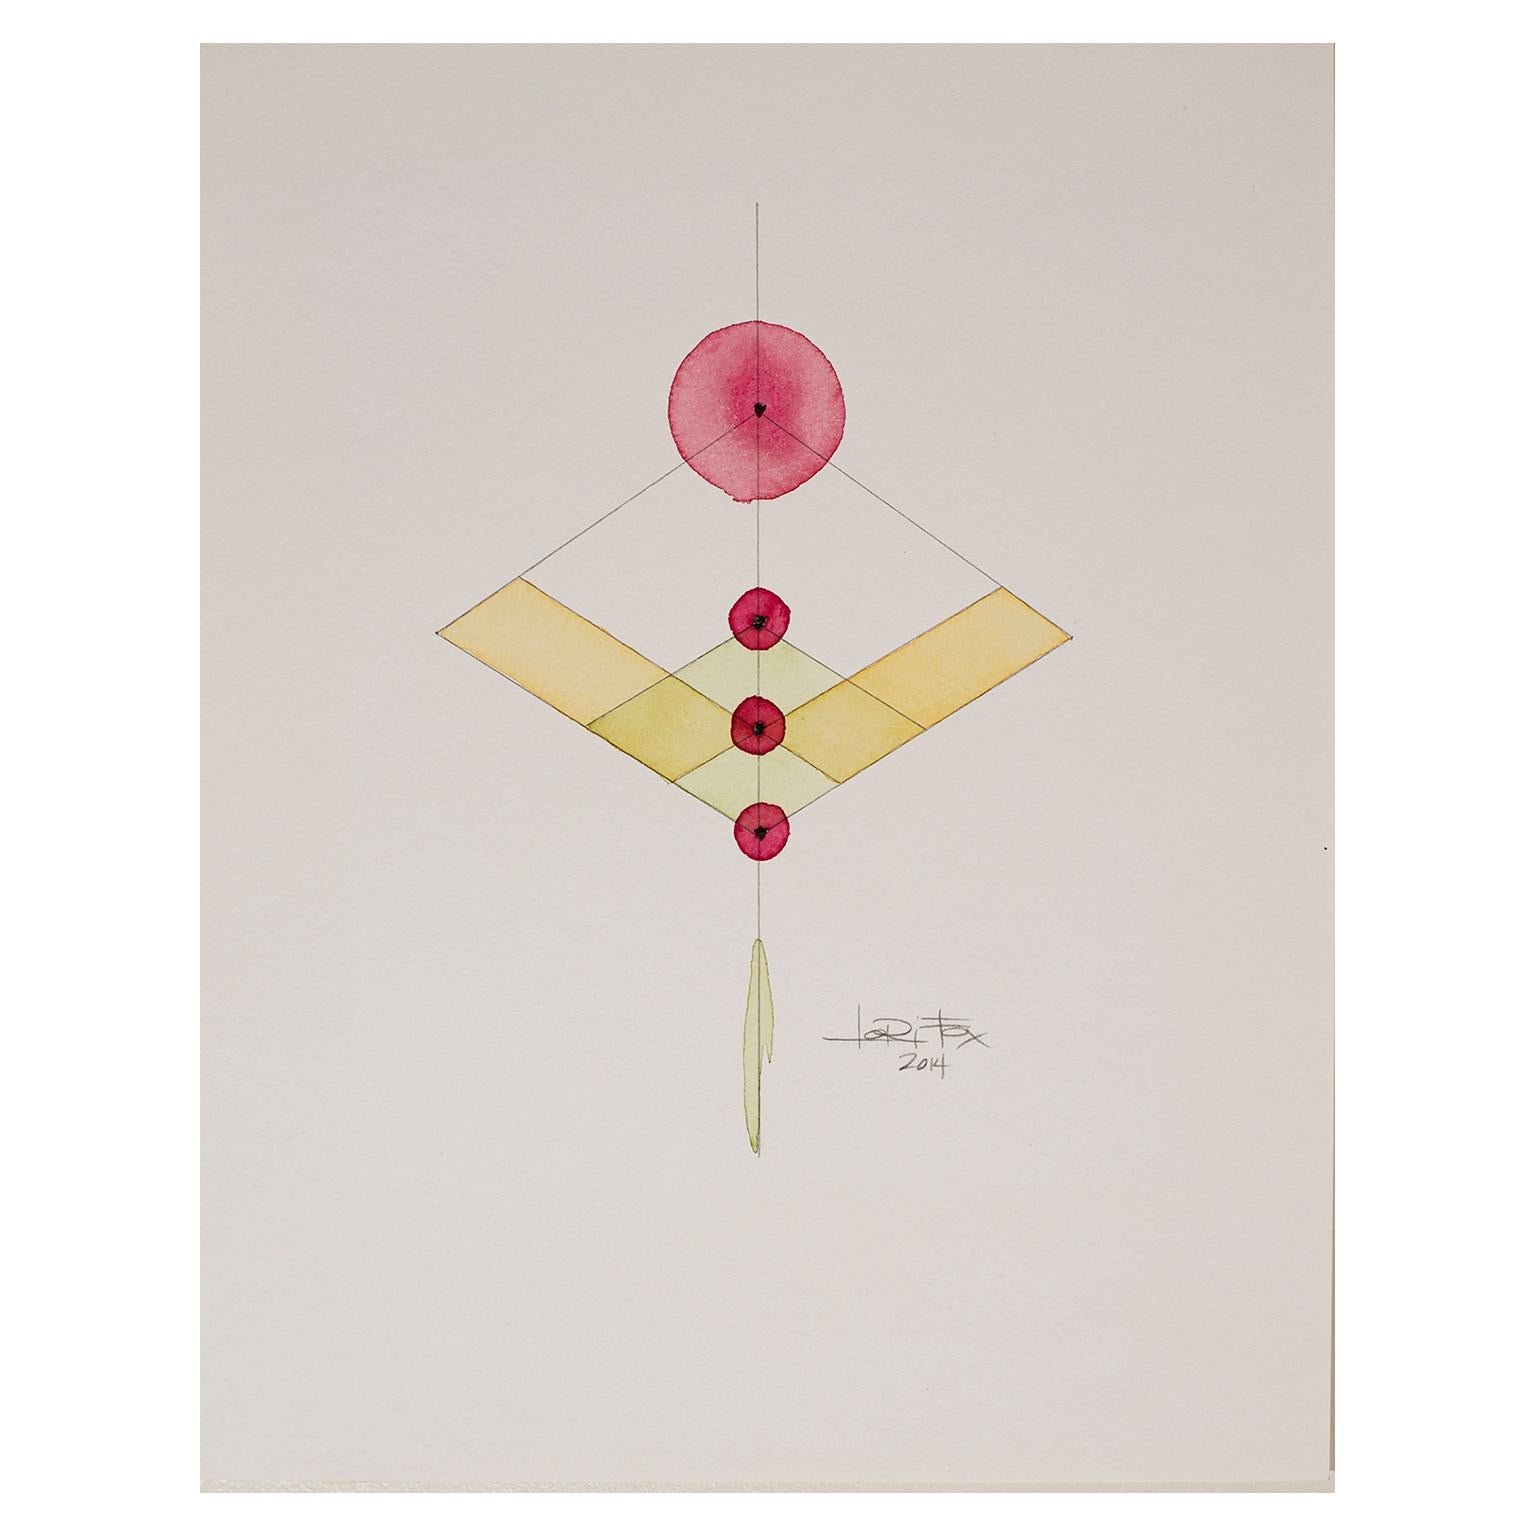 Totem 2.008 by Lori Fox. Abstract geometric yellow, red watercolour on paper For Sale 1